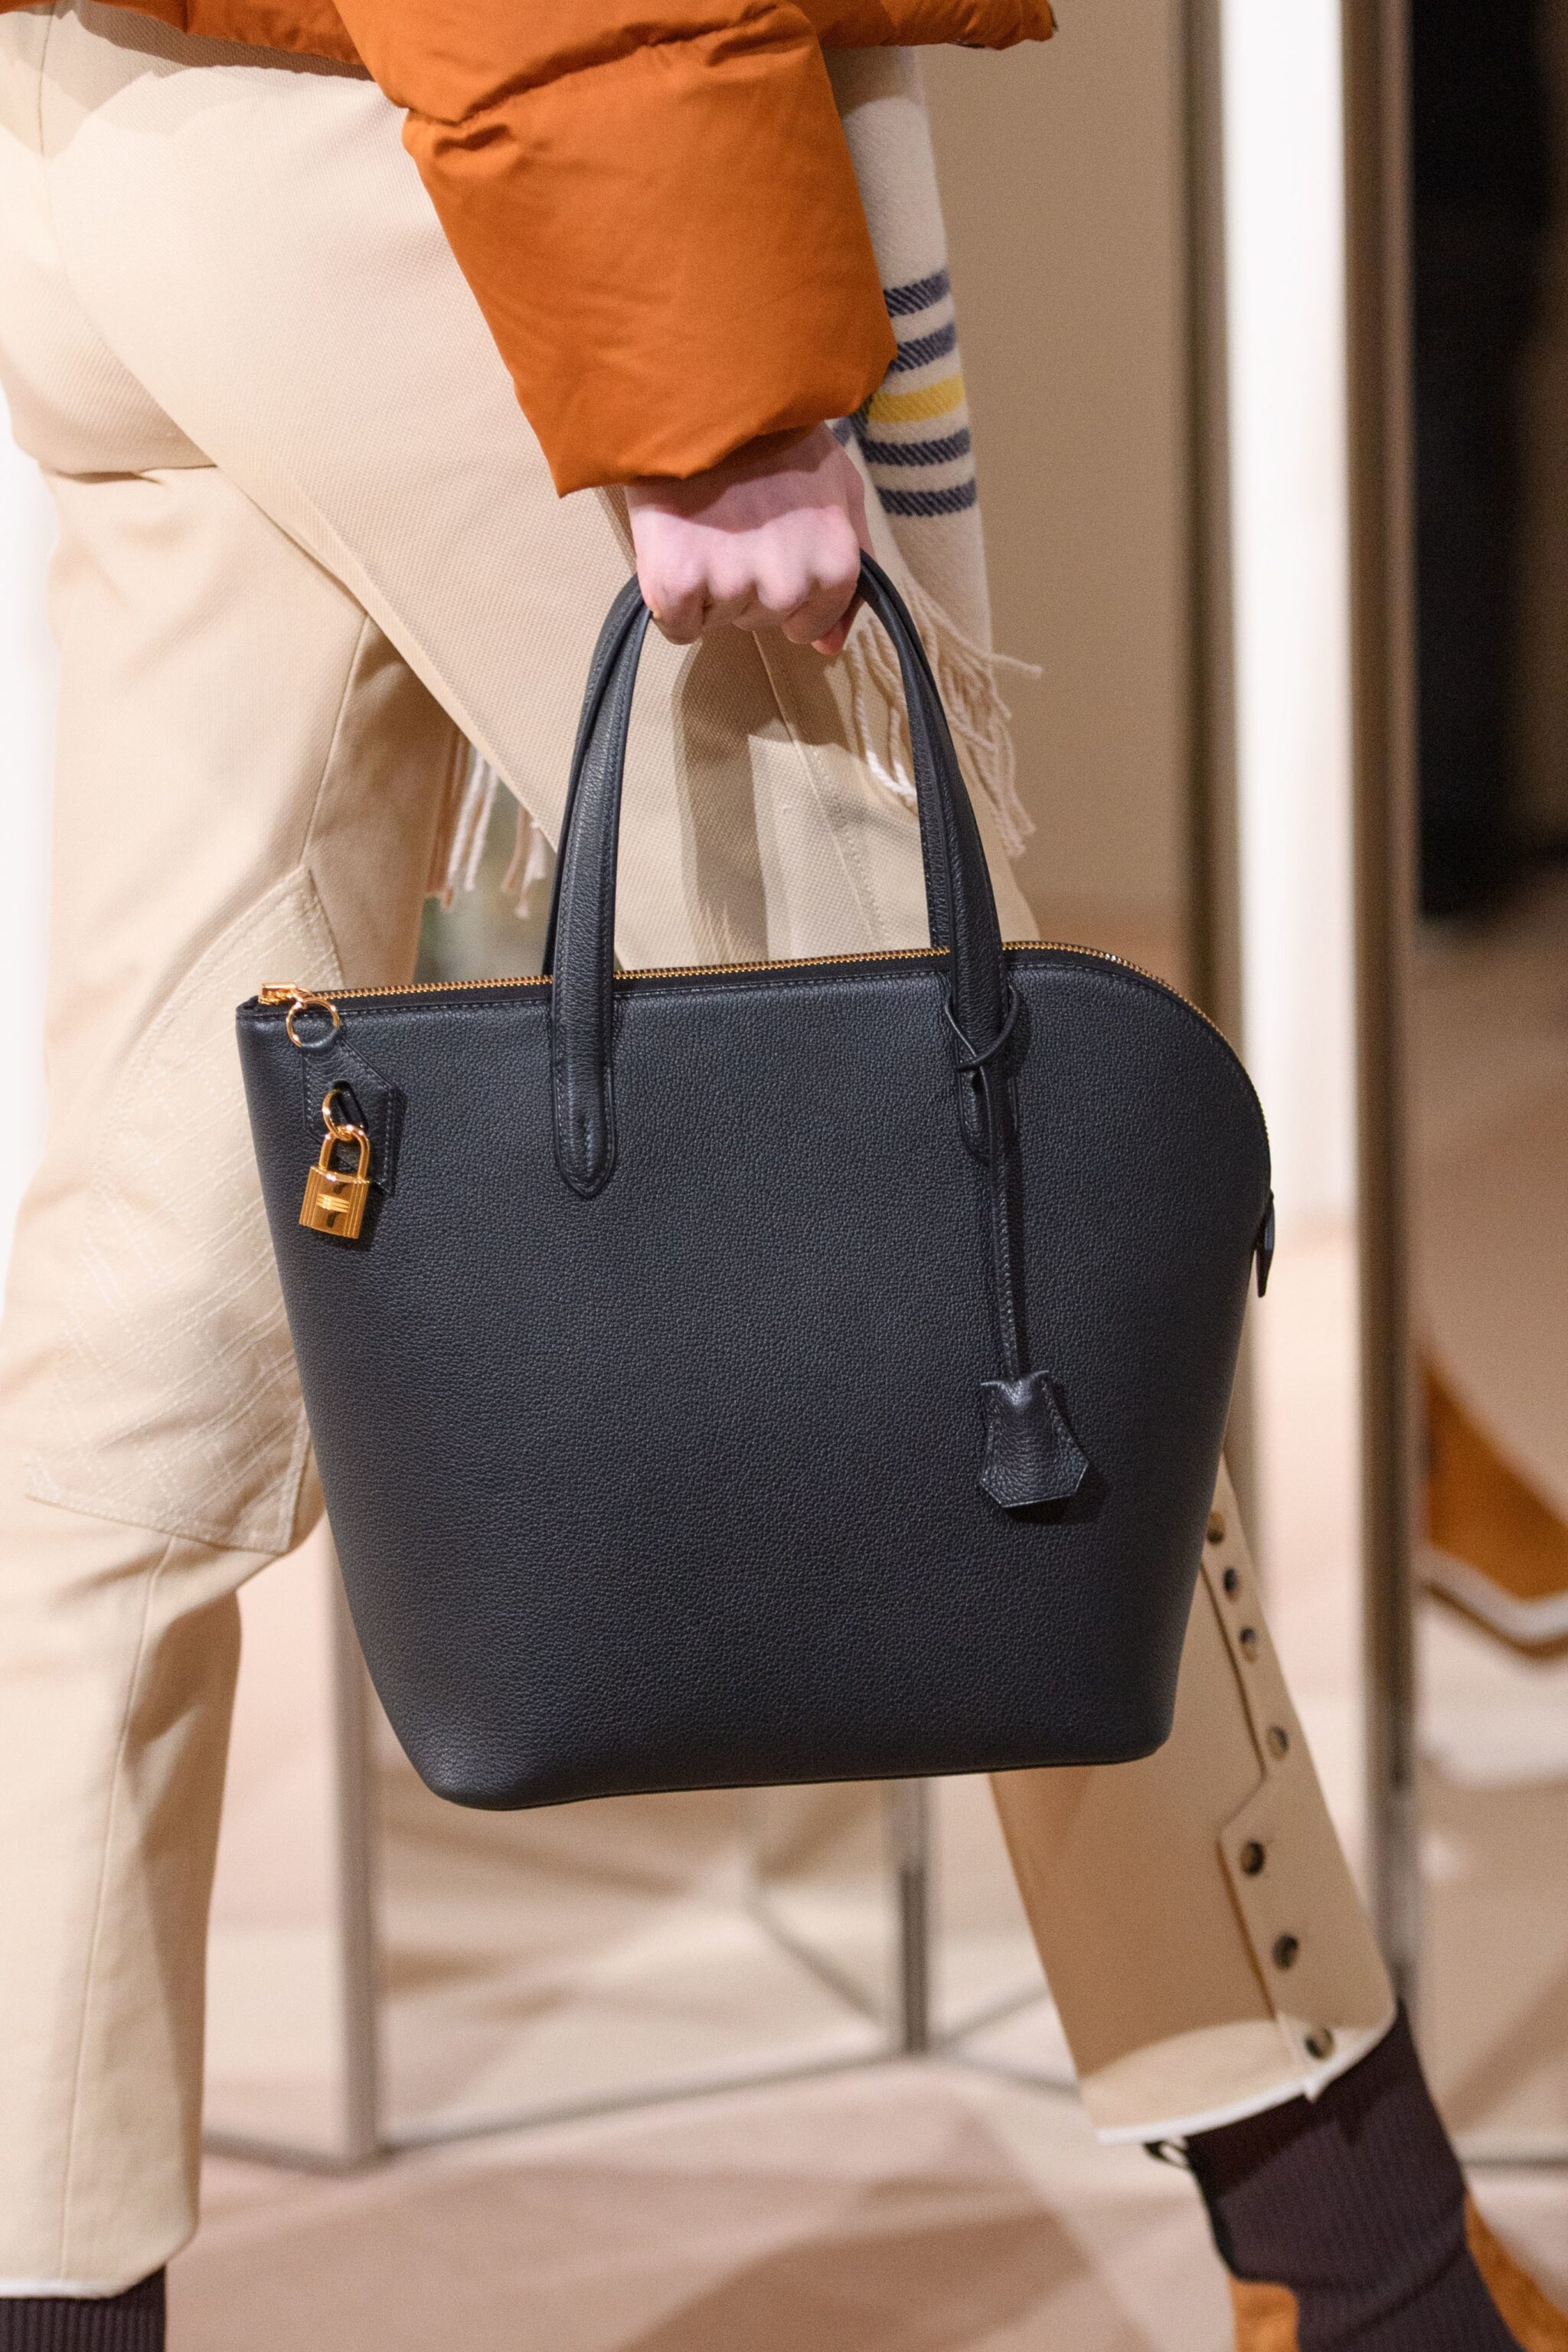 Hermes 24/24 Slouchy Bag Guide from Pre-Fall 2019 - Spotted Fashion